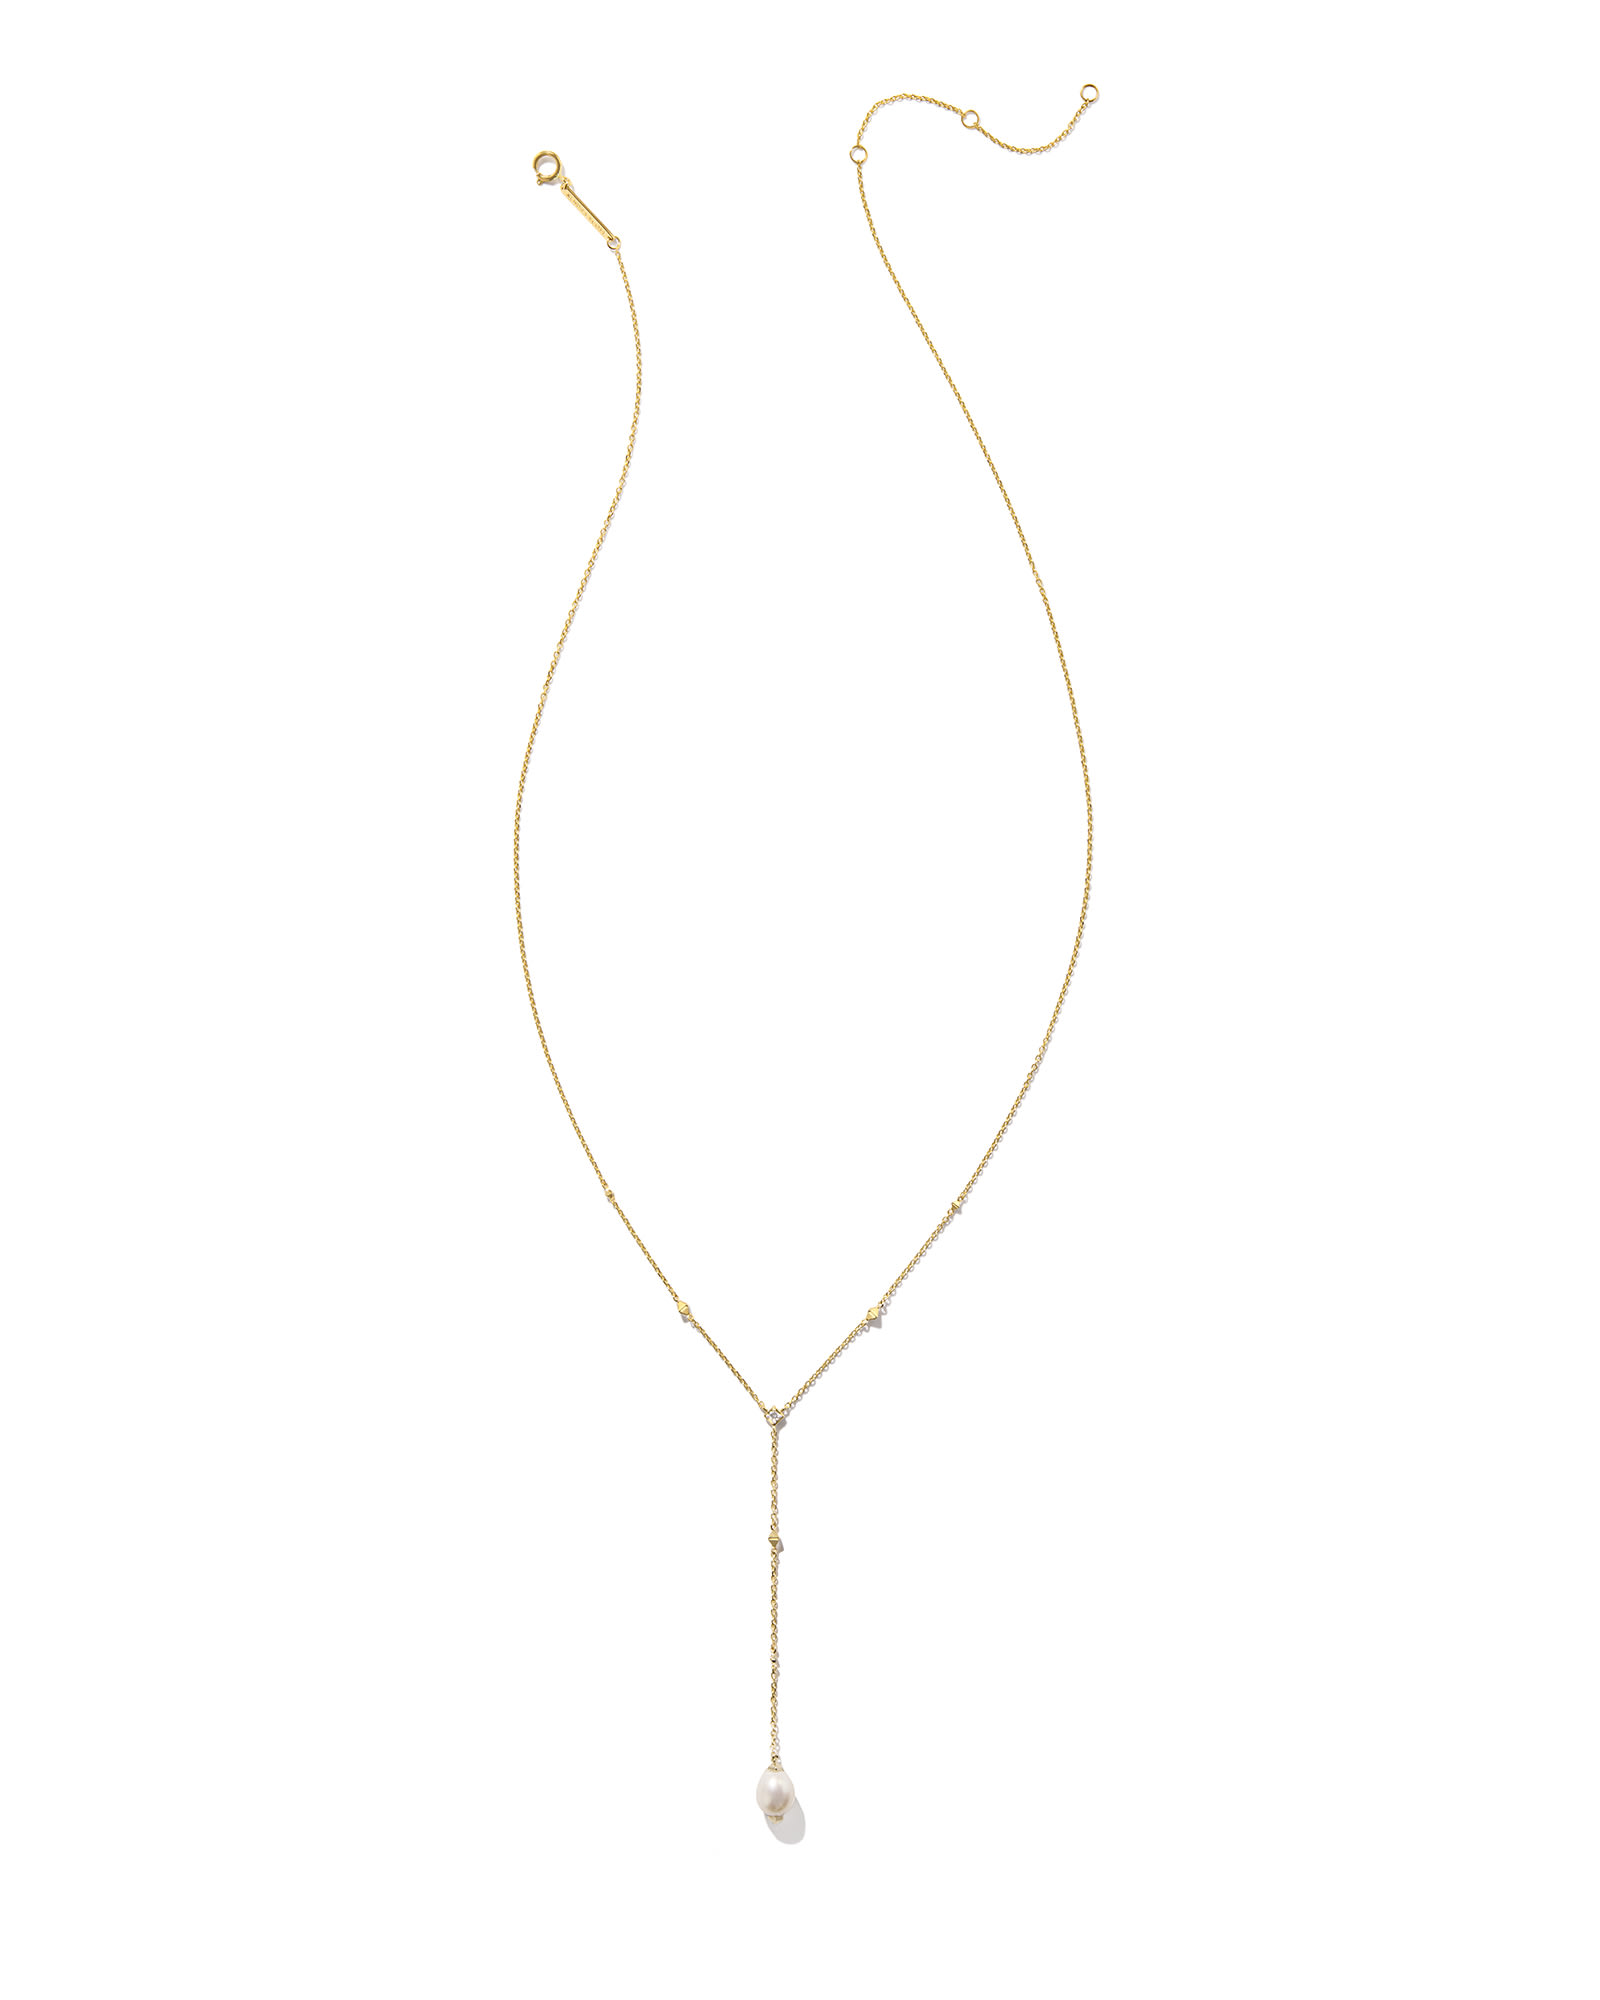 Michelle 14k Yellow Gold Y Necklace in White Pearl